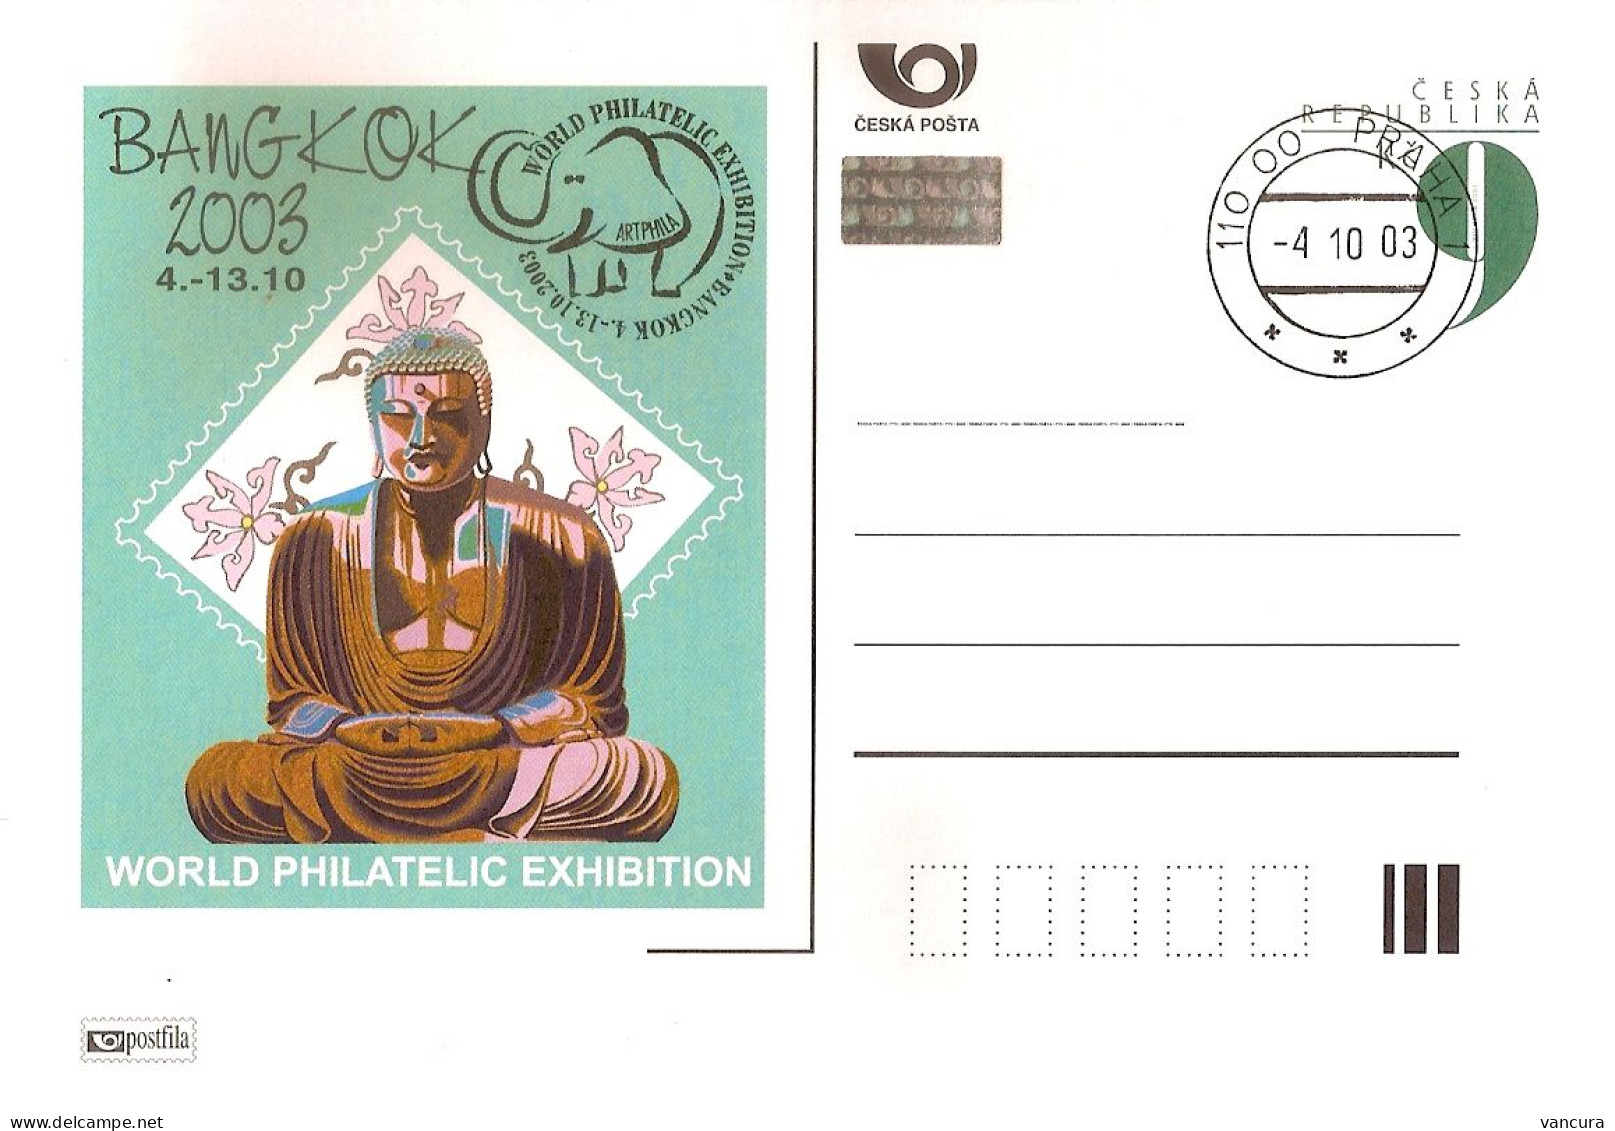 CDV A 92 Czech Republic Bangkog Stamp Exhibition Buddha 2003 NOTICE THE POOR SCAN, BUT THE CARD IS O.K. - Postcards